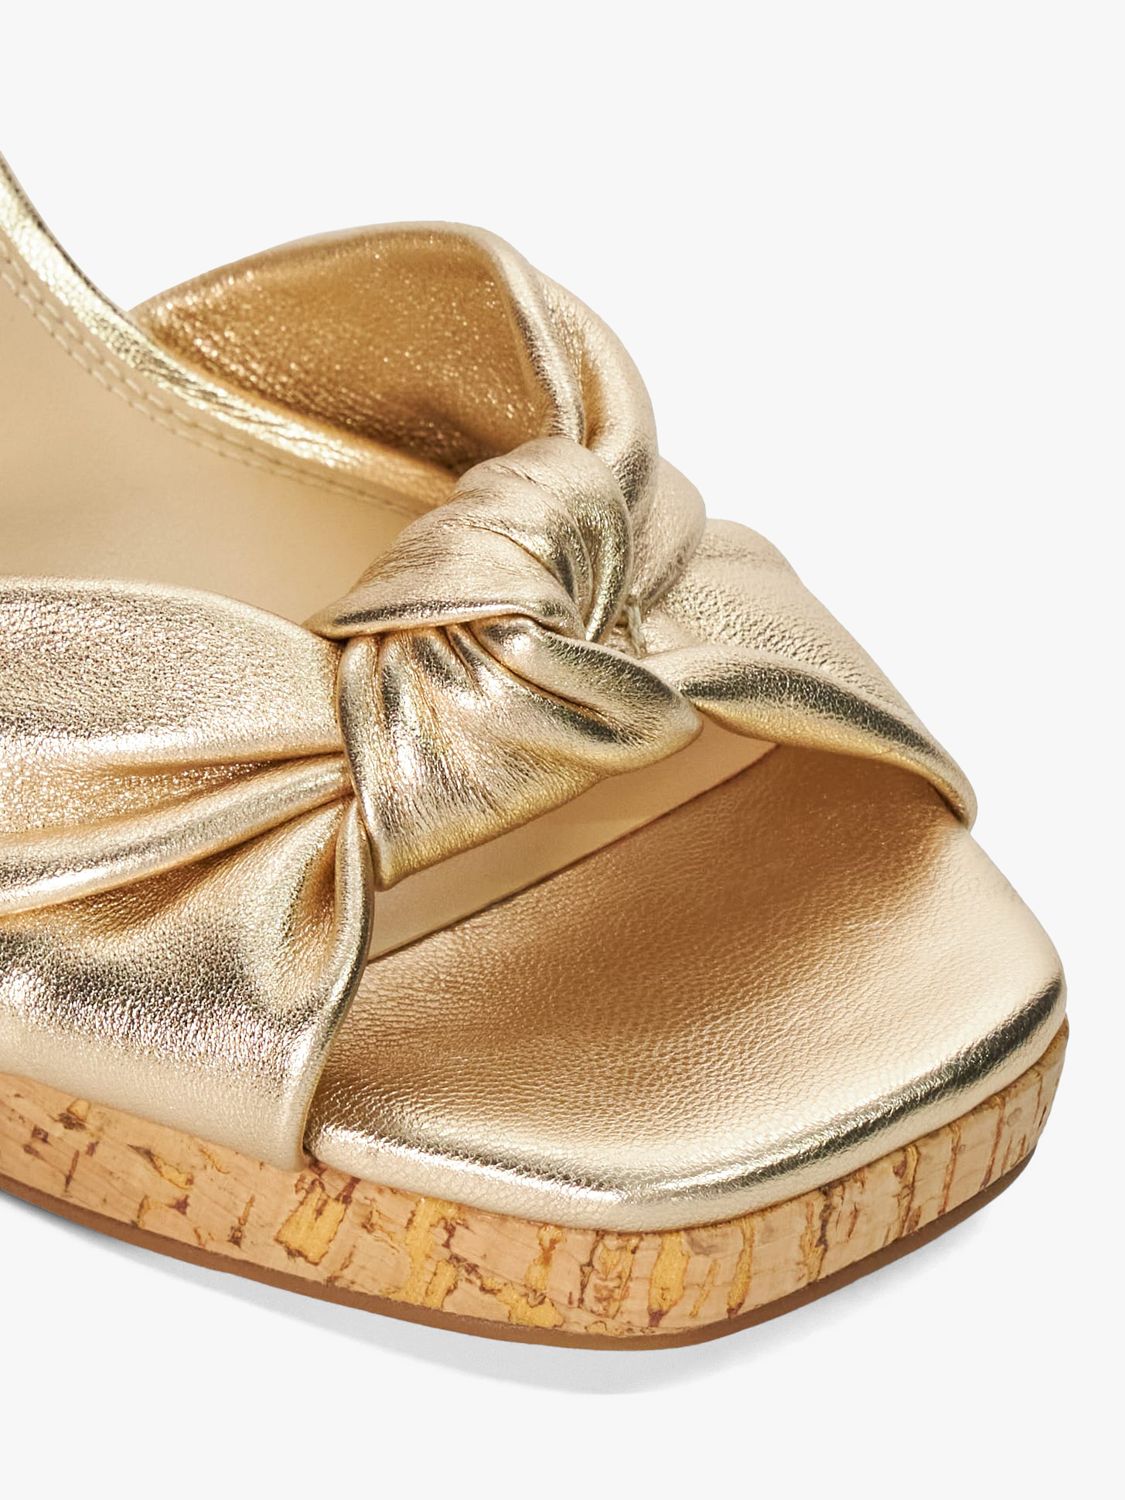 Buy Dune Kaino Knotted Leather Wedge Sandals, Gold Online at johnlewis.com